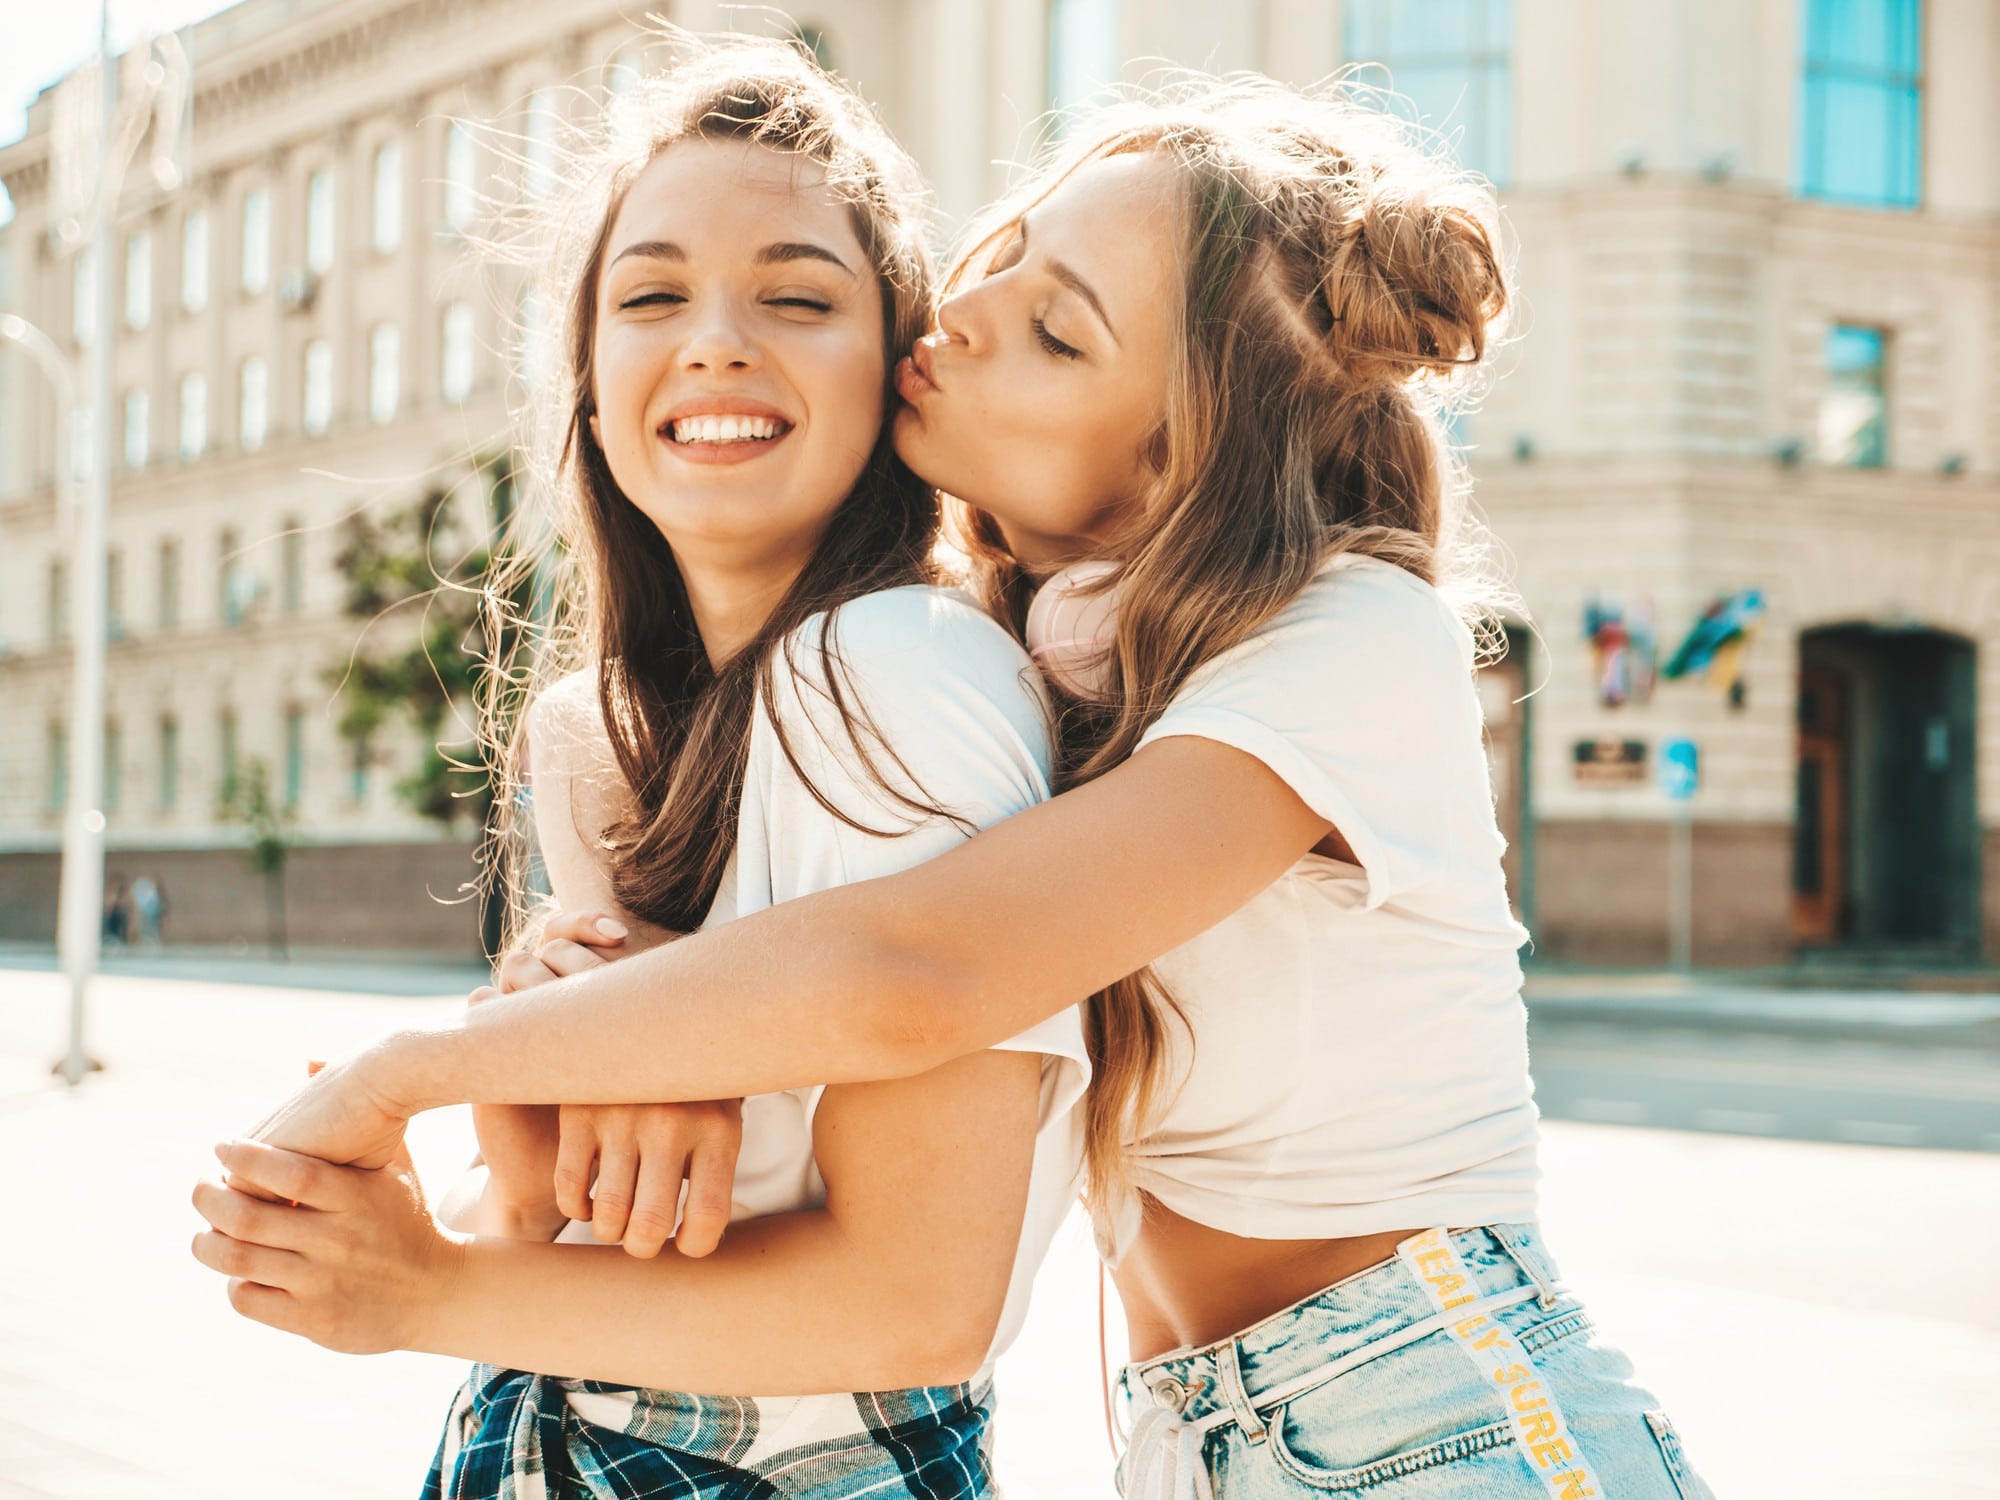 Diverse Multi Nation Girls Group, Teenage Friends Company Cheerful Having  Fun, Happy Smiling, Cute Posing Isolated on Stock Photo - Image of adult,  college: 234580898